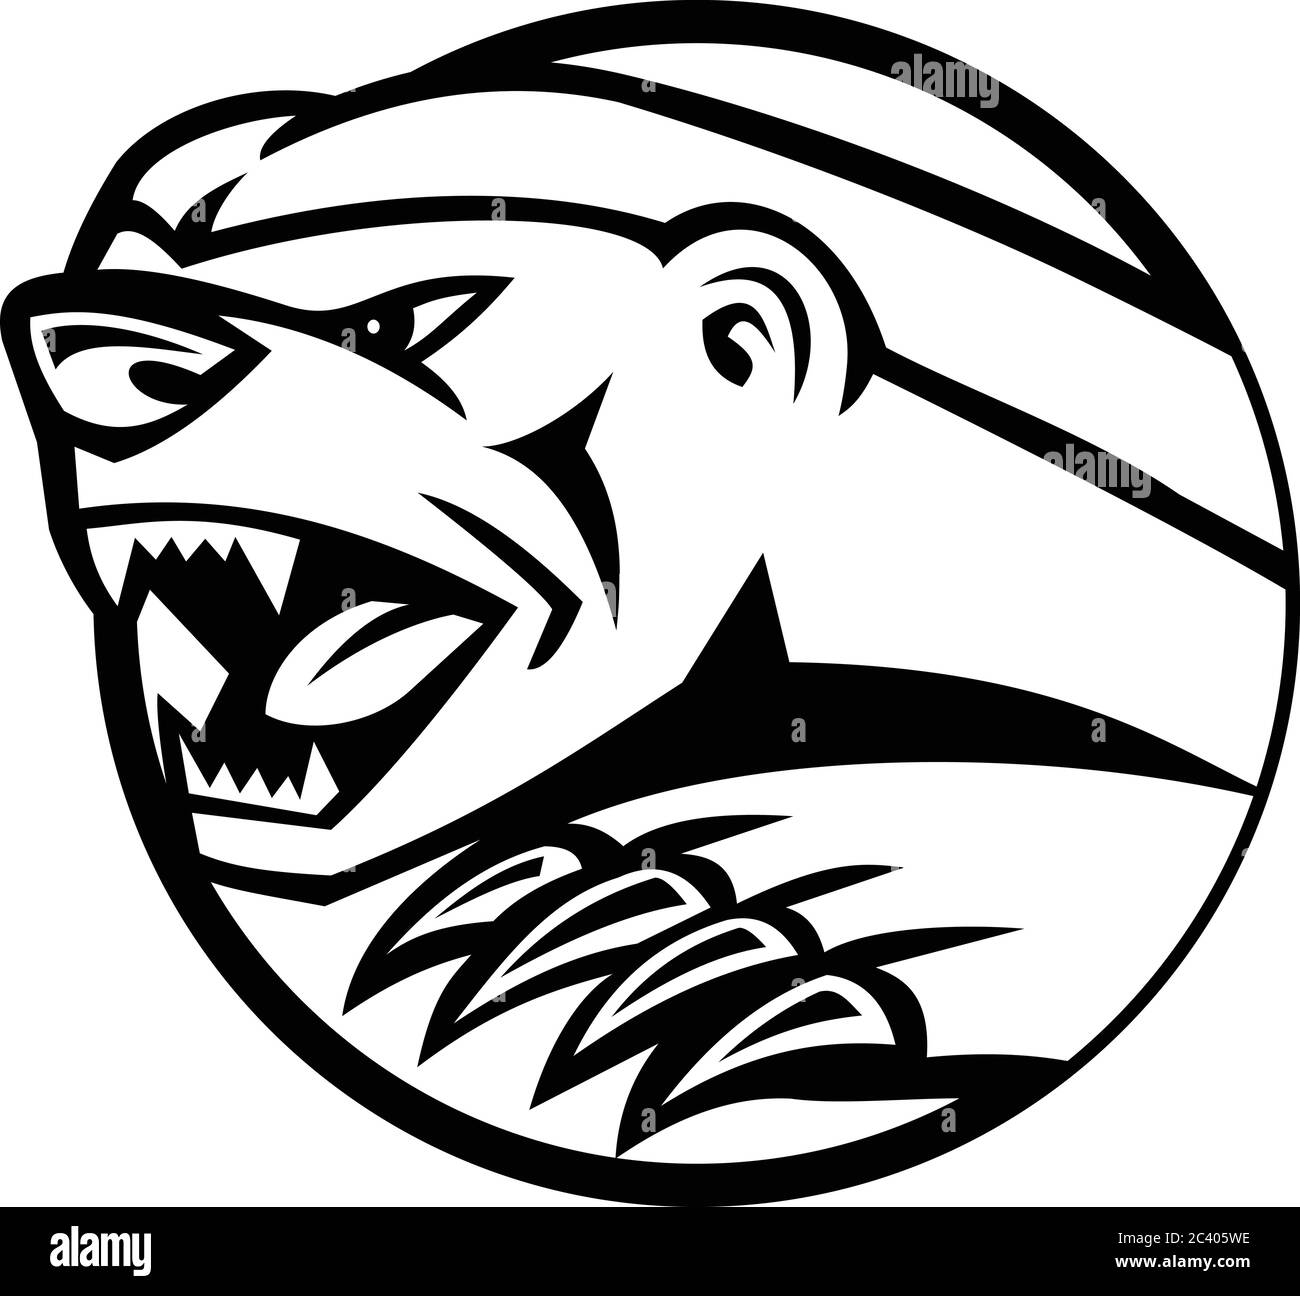 Black and white illustration of head of an angry honey badger, also known as the ratel, the only species in the mustelid subfamily Mellivorinae, swipi Stock Vector